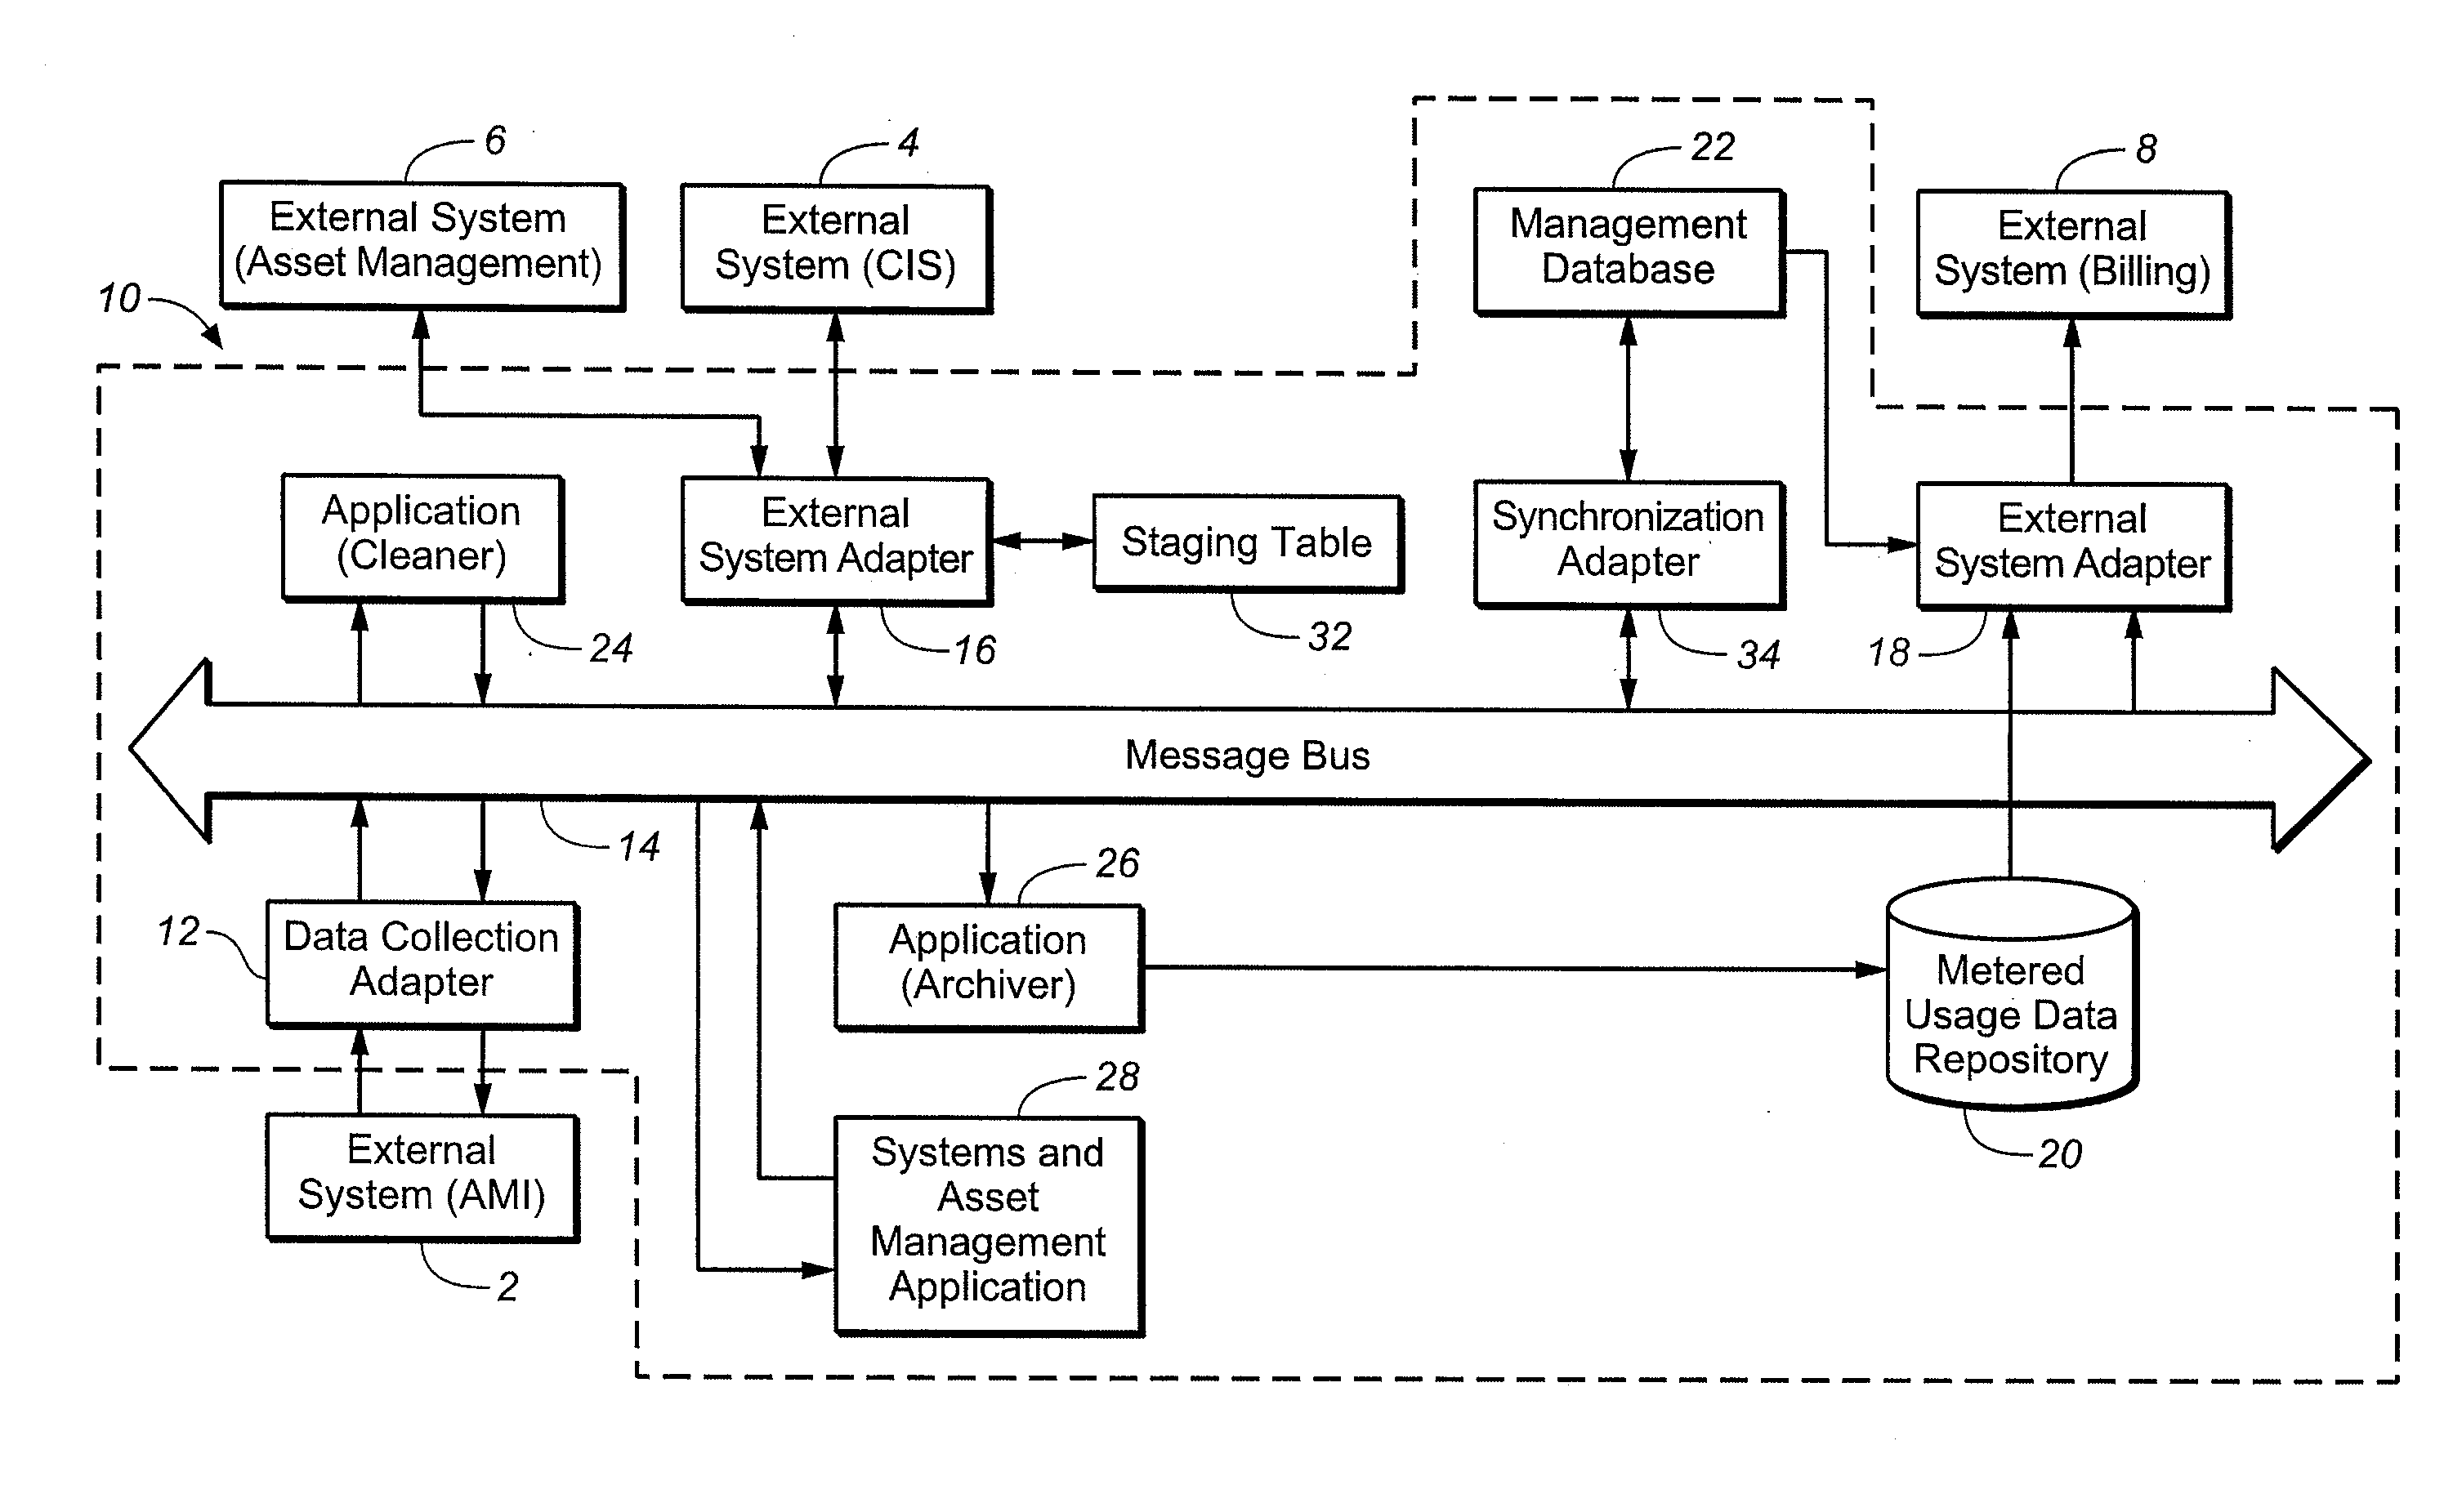 Message-bus-based advanced meter information system with applications for cleaning, estimating and validating meter data